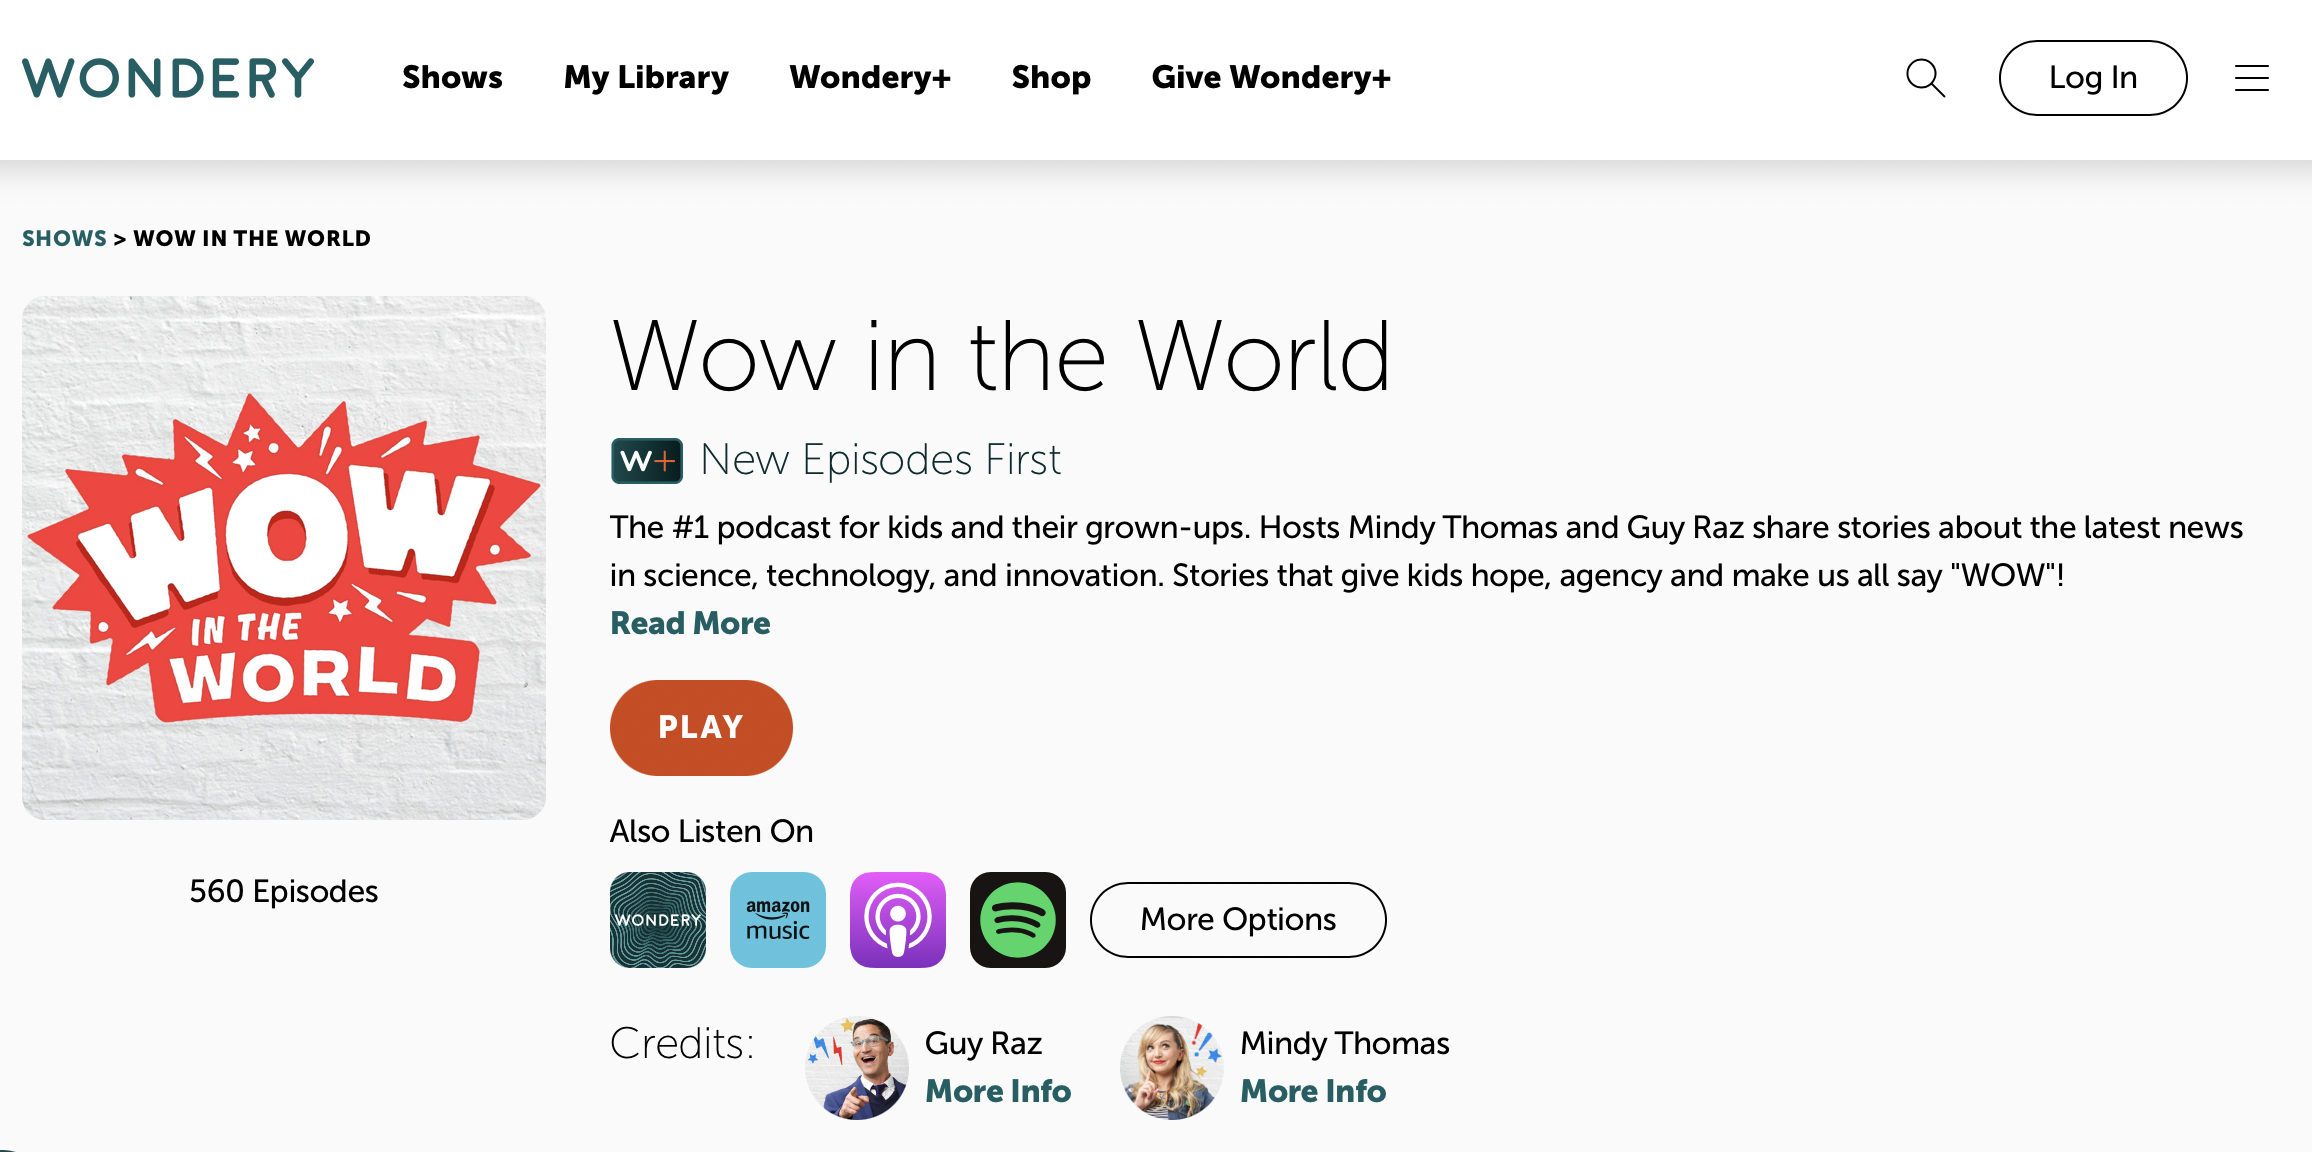 Wow in the World Podcast